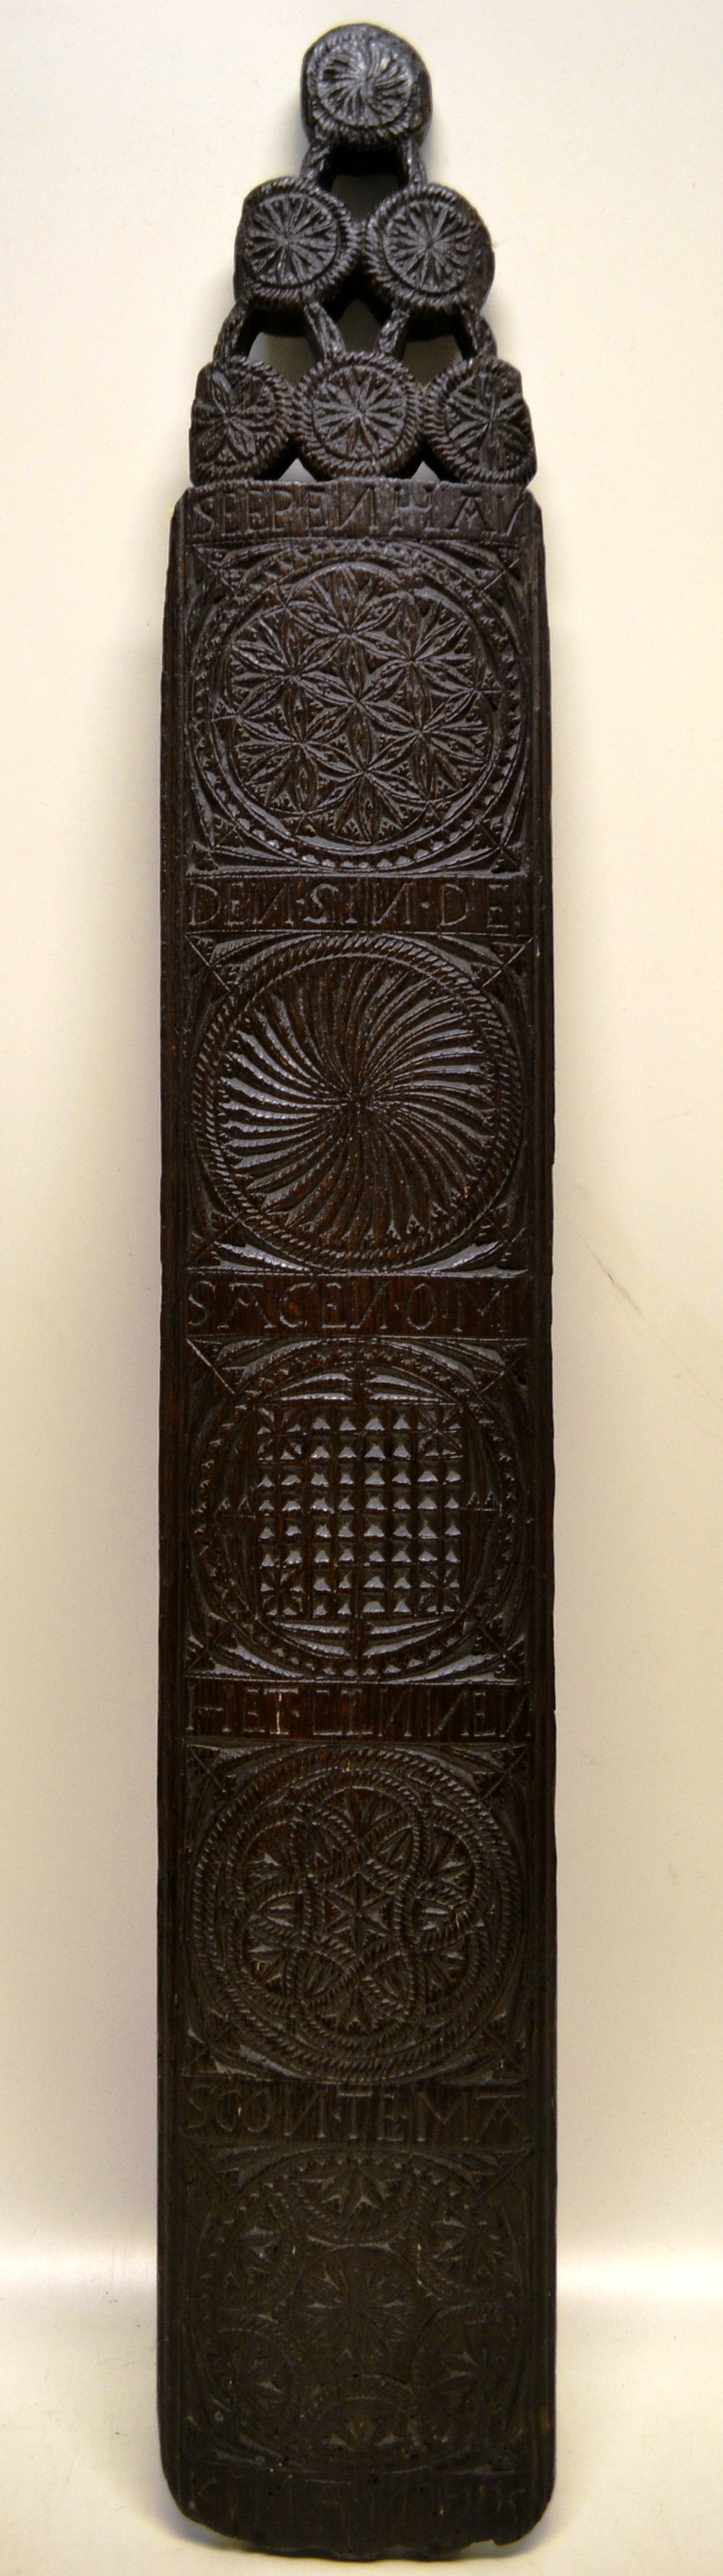 An early eighteenth century Friesland oak mangling board, with incised pattern and text and dated